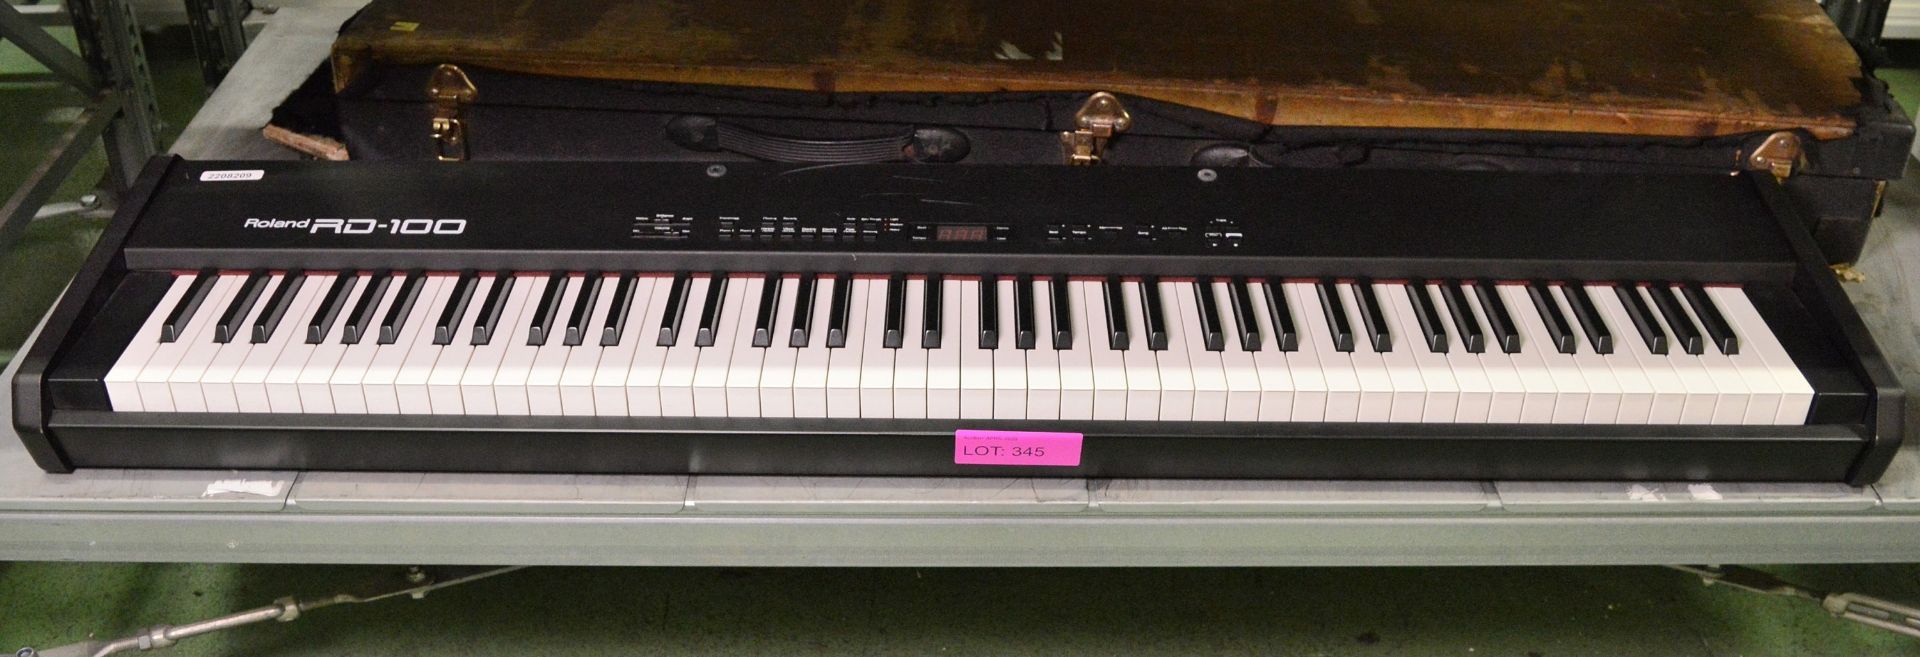 Roland RD-100 Electric Keyboard & Case.